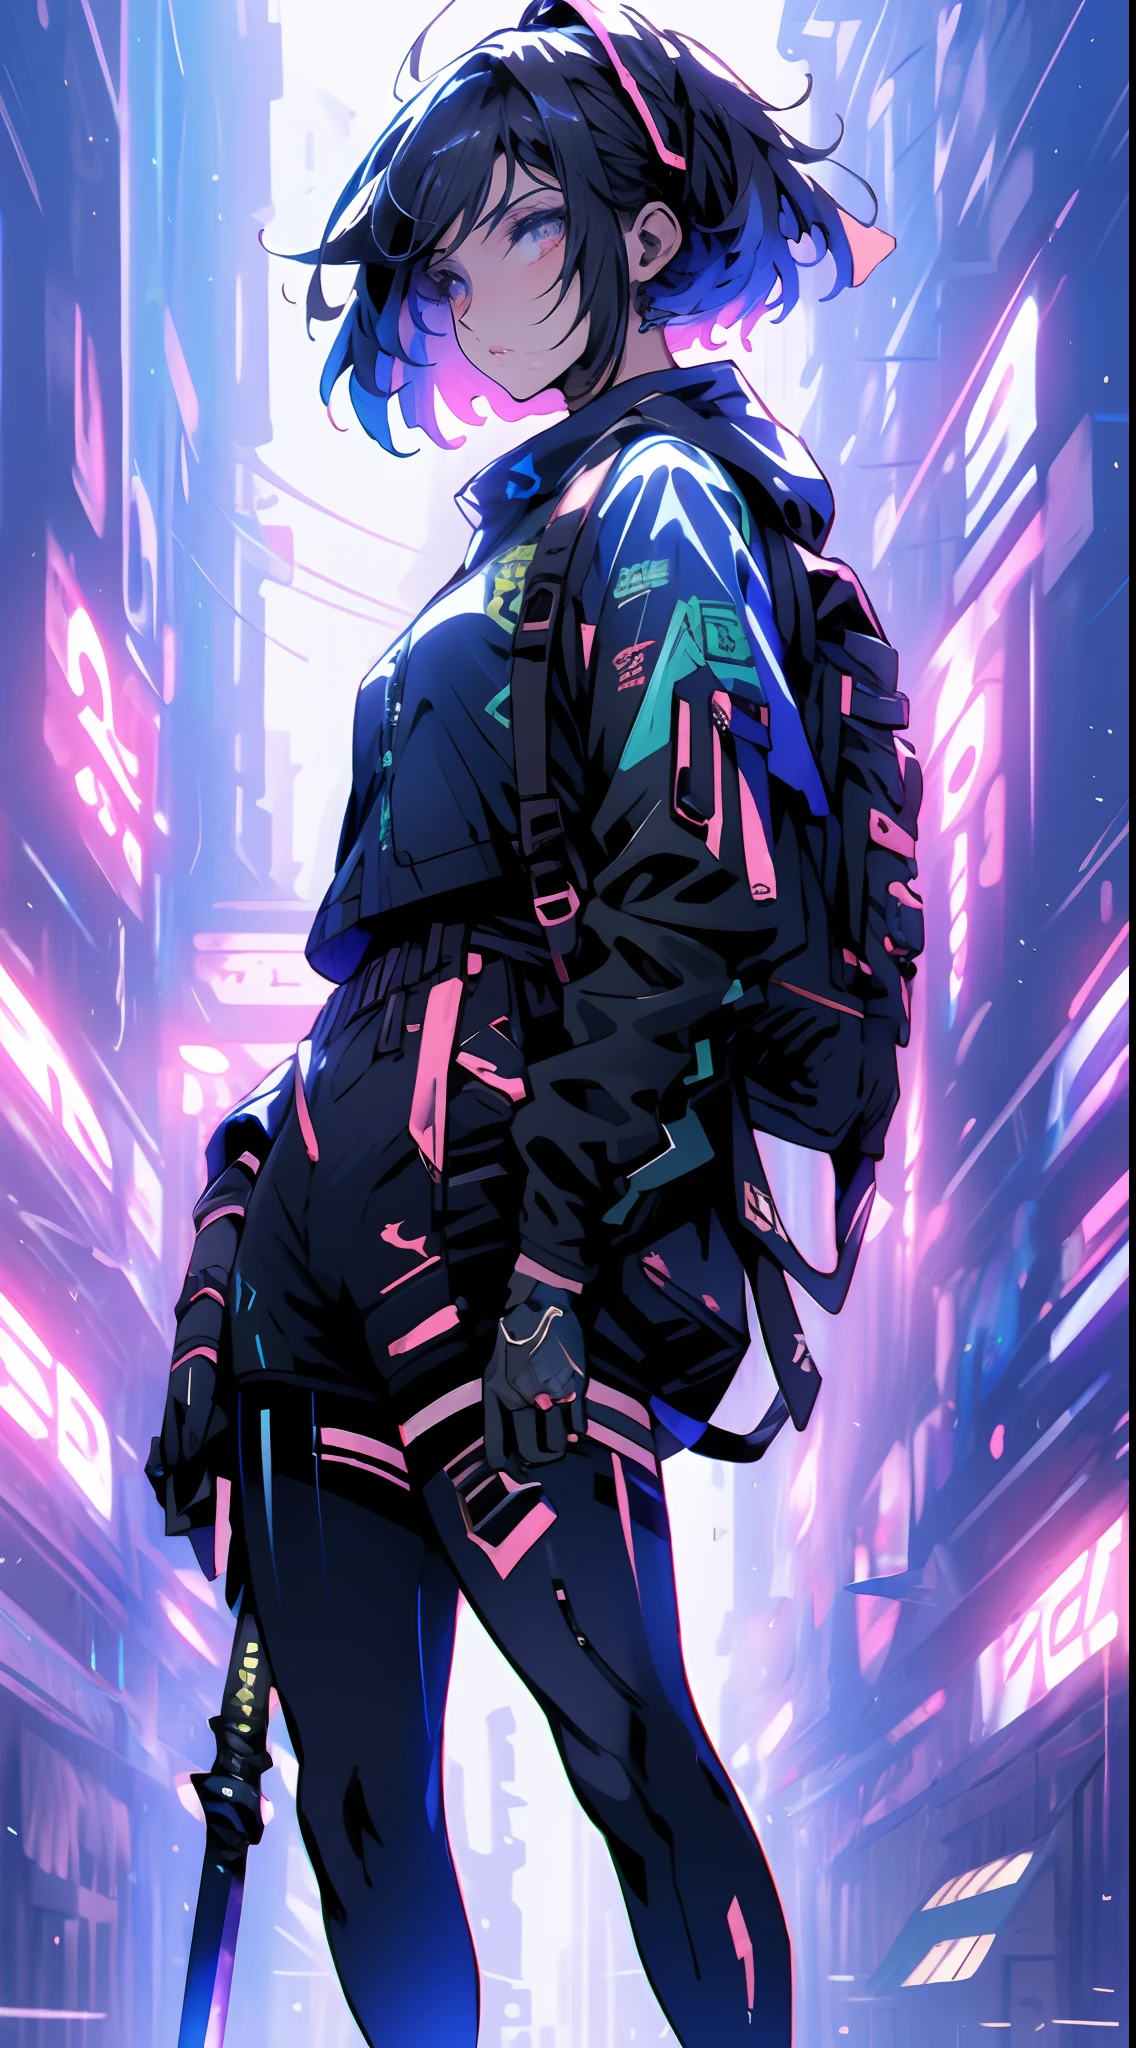 anime - style image of a woman with a sword and a backpack, guweiz, badass anime 8 k, wearing japanese techwear, artwork in the style of guweiz, anime style 4 k, e-girl, e - girl, cyberpunk streetwear, from arknights, anime style. 8k, digital cyberpunk anime art, short white hair, asymmetrical bangs, insanely detailed face and eyes, Perfect lips, dramatic, cinematic lighting, fine expression, fine detail, cyberpunk art, illustration, masterpiece, drawing, anime art, in the style of Yusuke Murata.